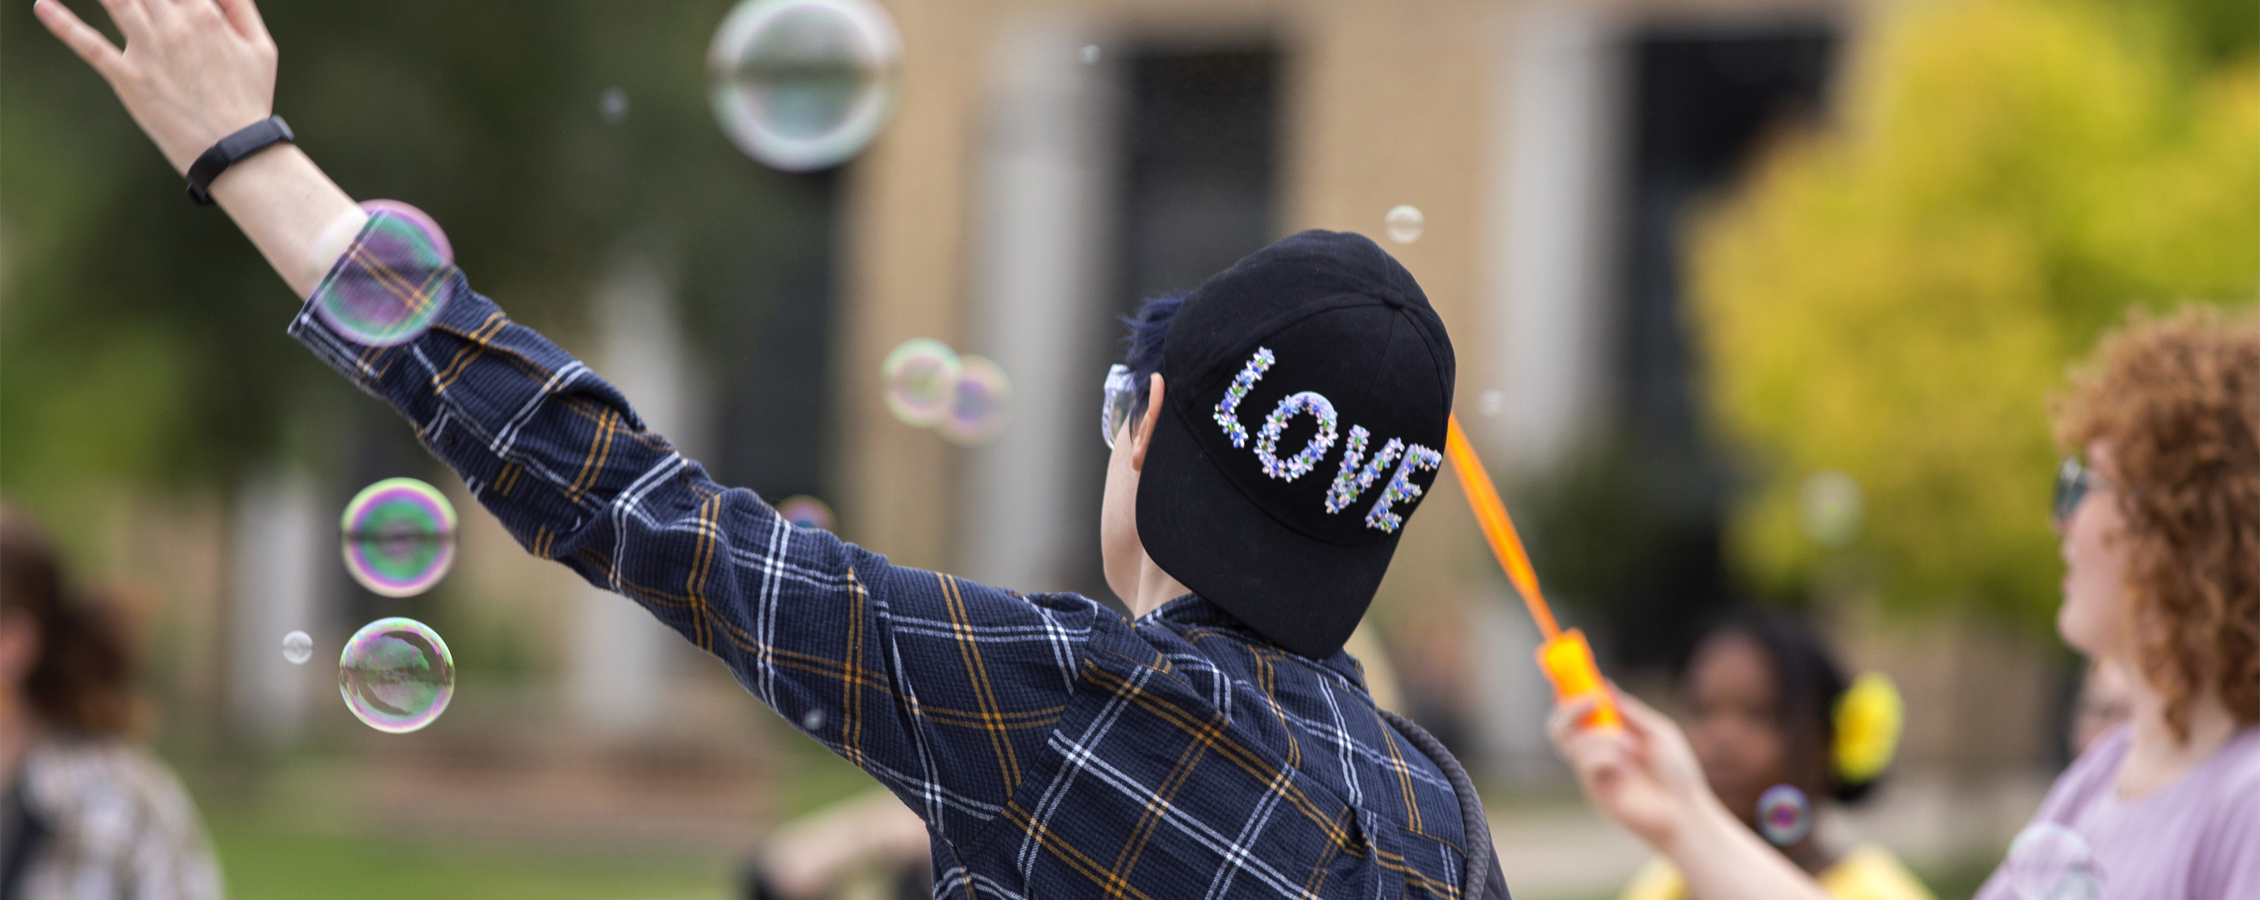 A person wears a hat that says love while bubbles float in the air.